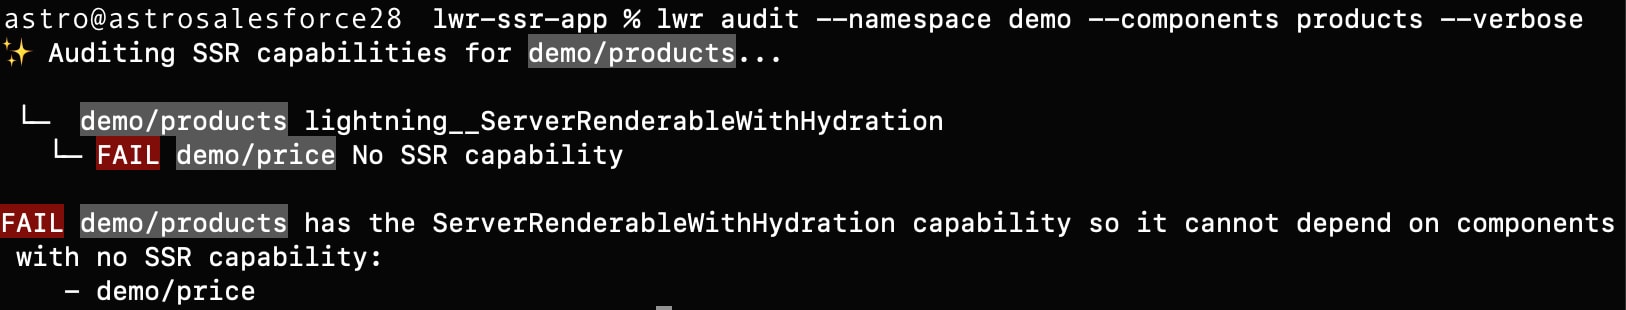 Screenshot of the CLI for a component tree that failed lwr audit tests.